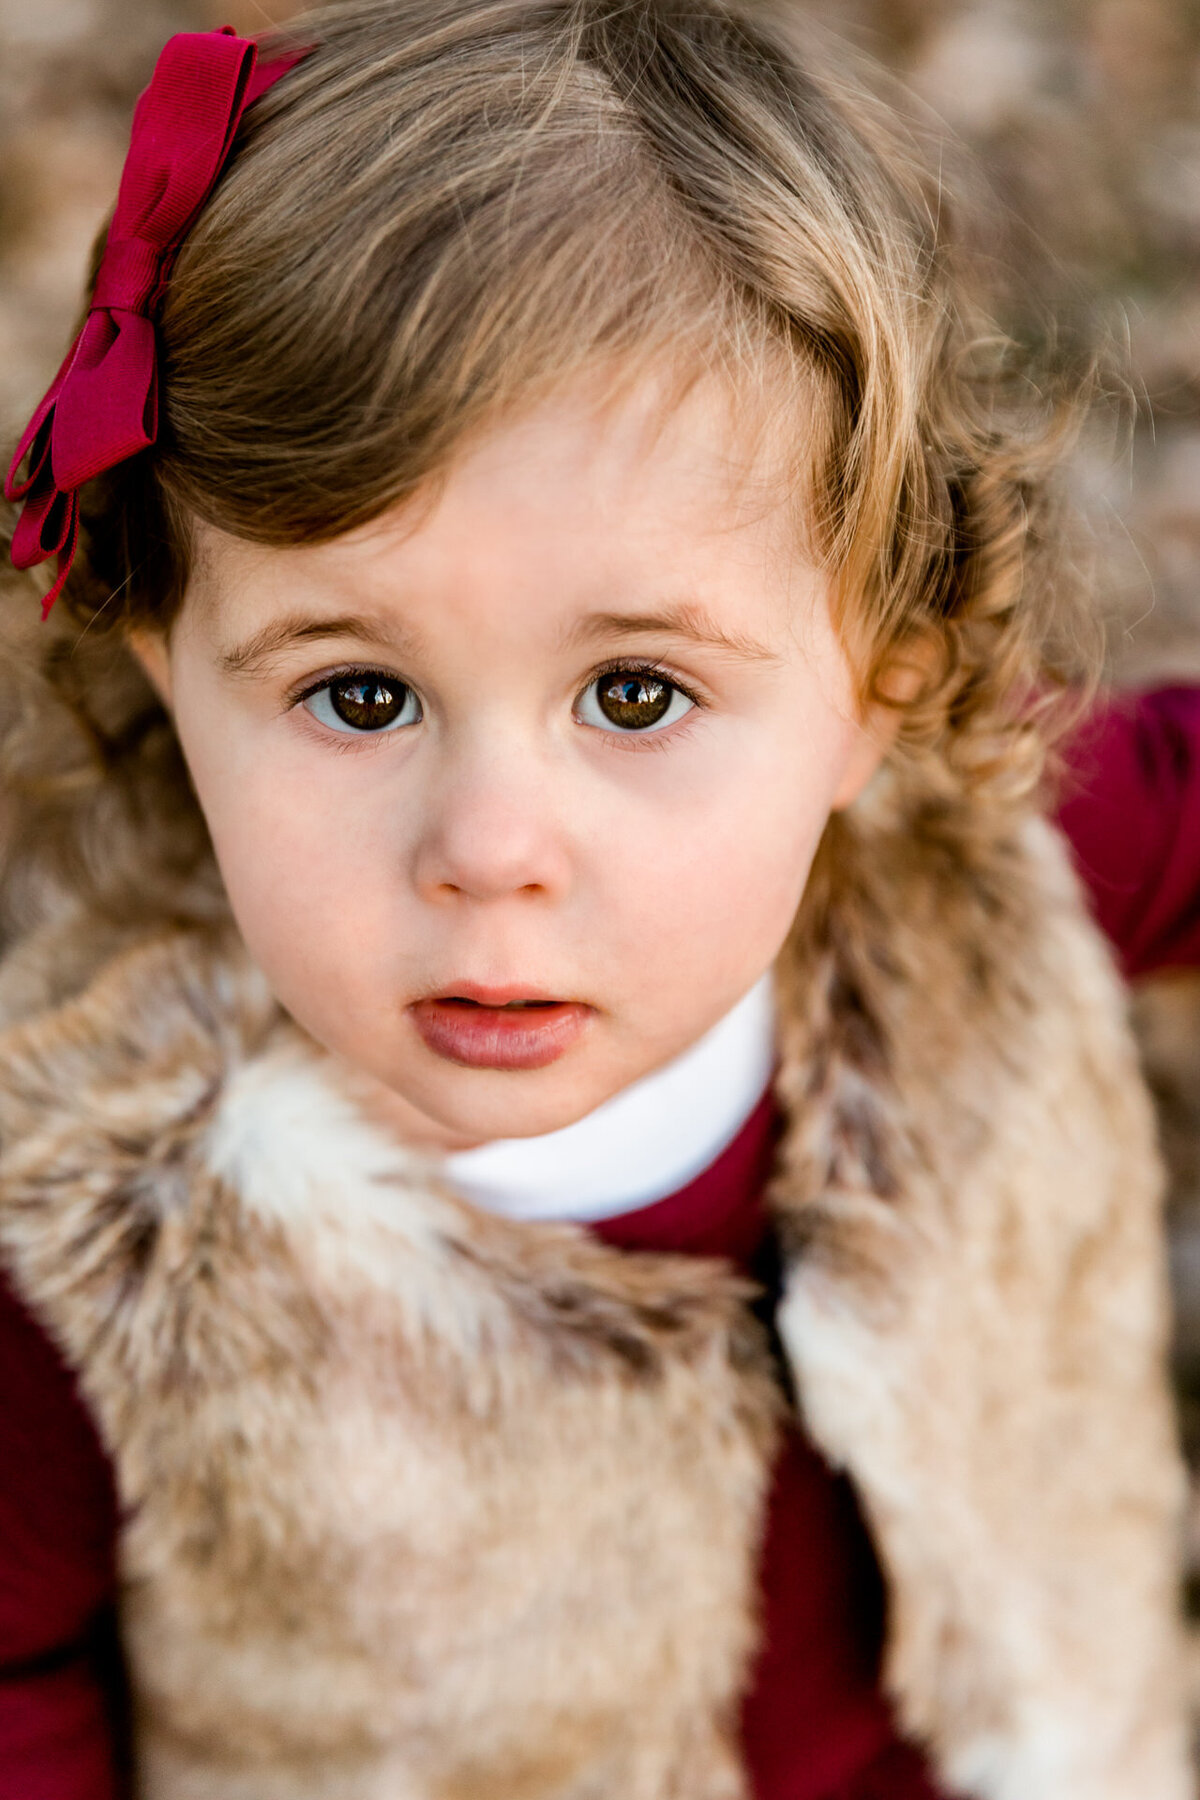 Toddler Girl Close-up Portrait during outdoor fall photo session in Westfield, NJ